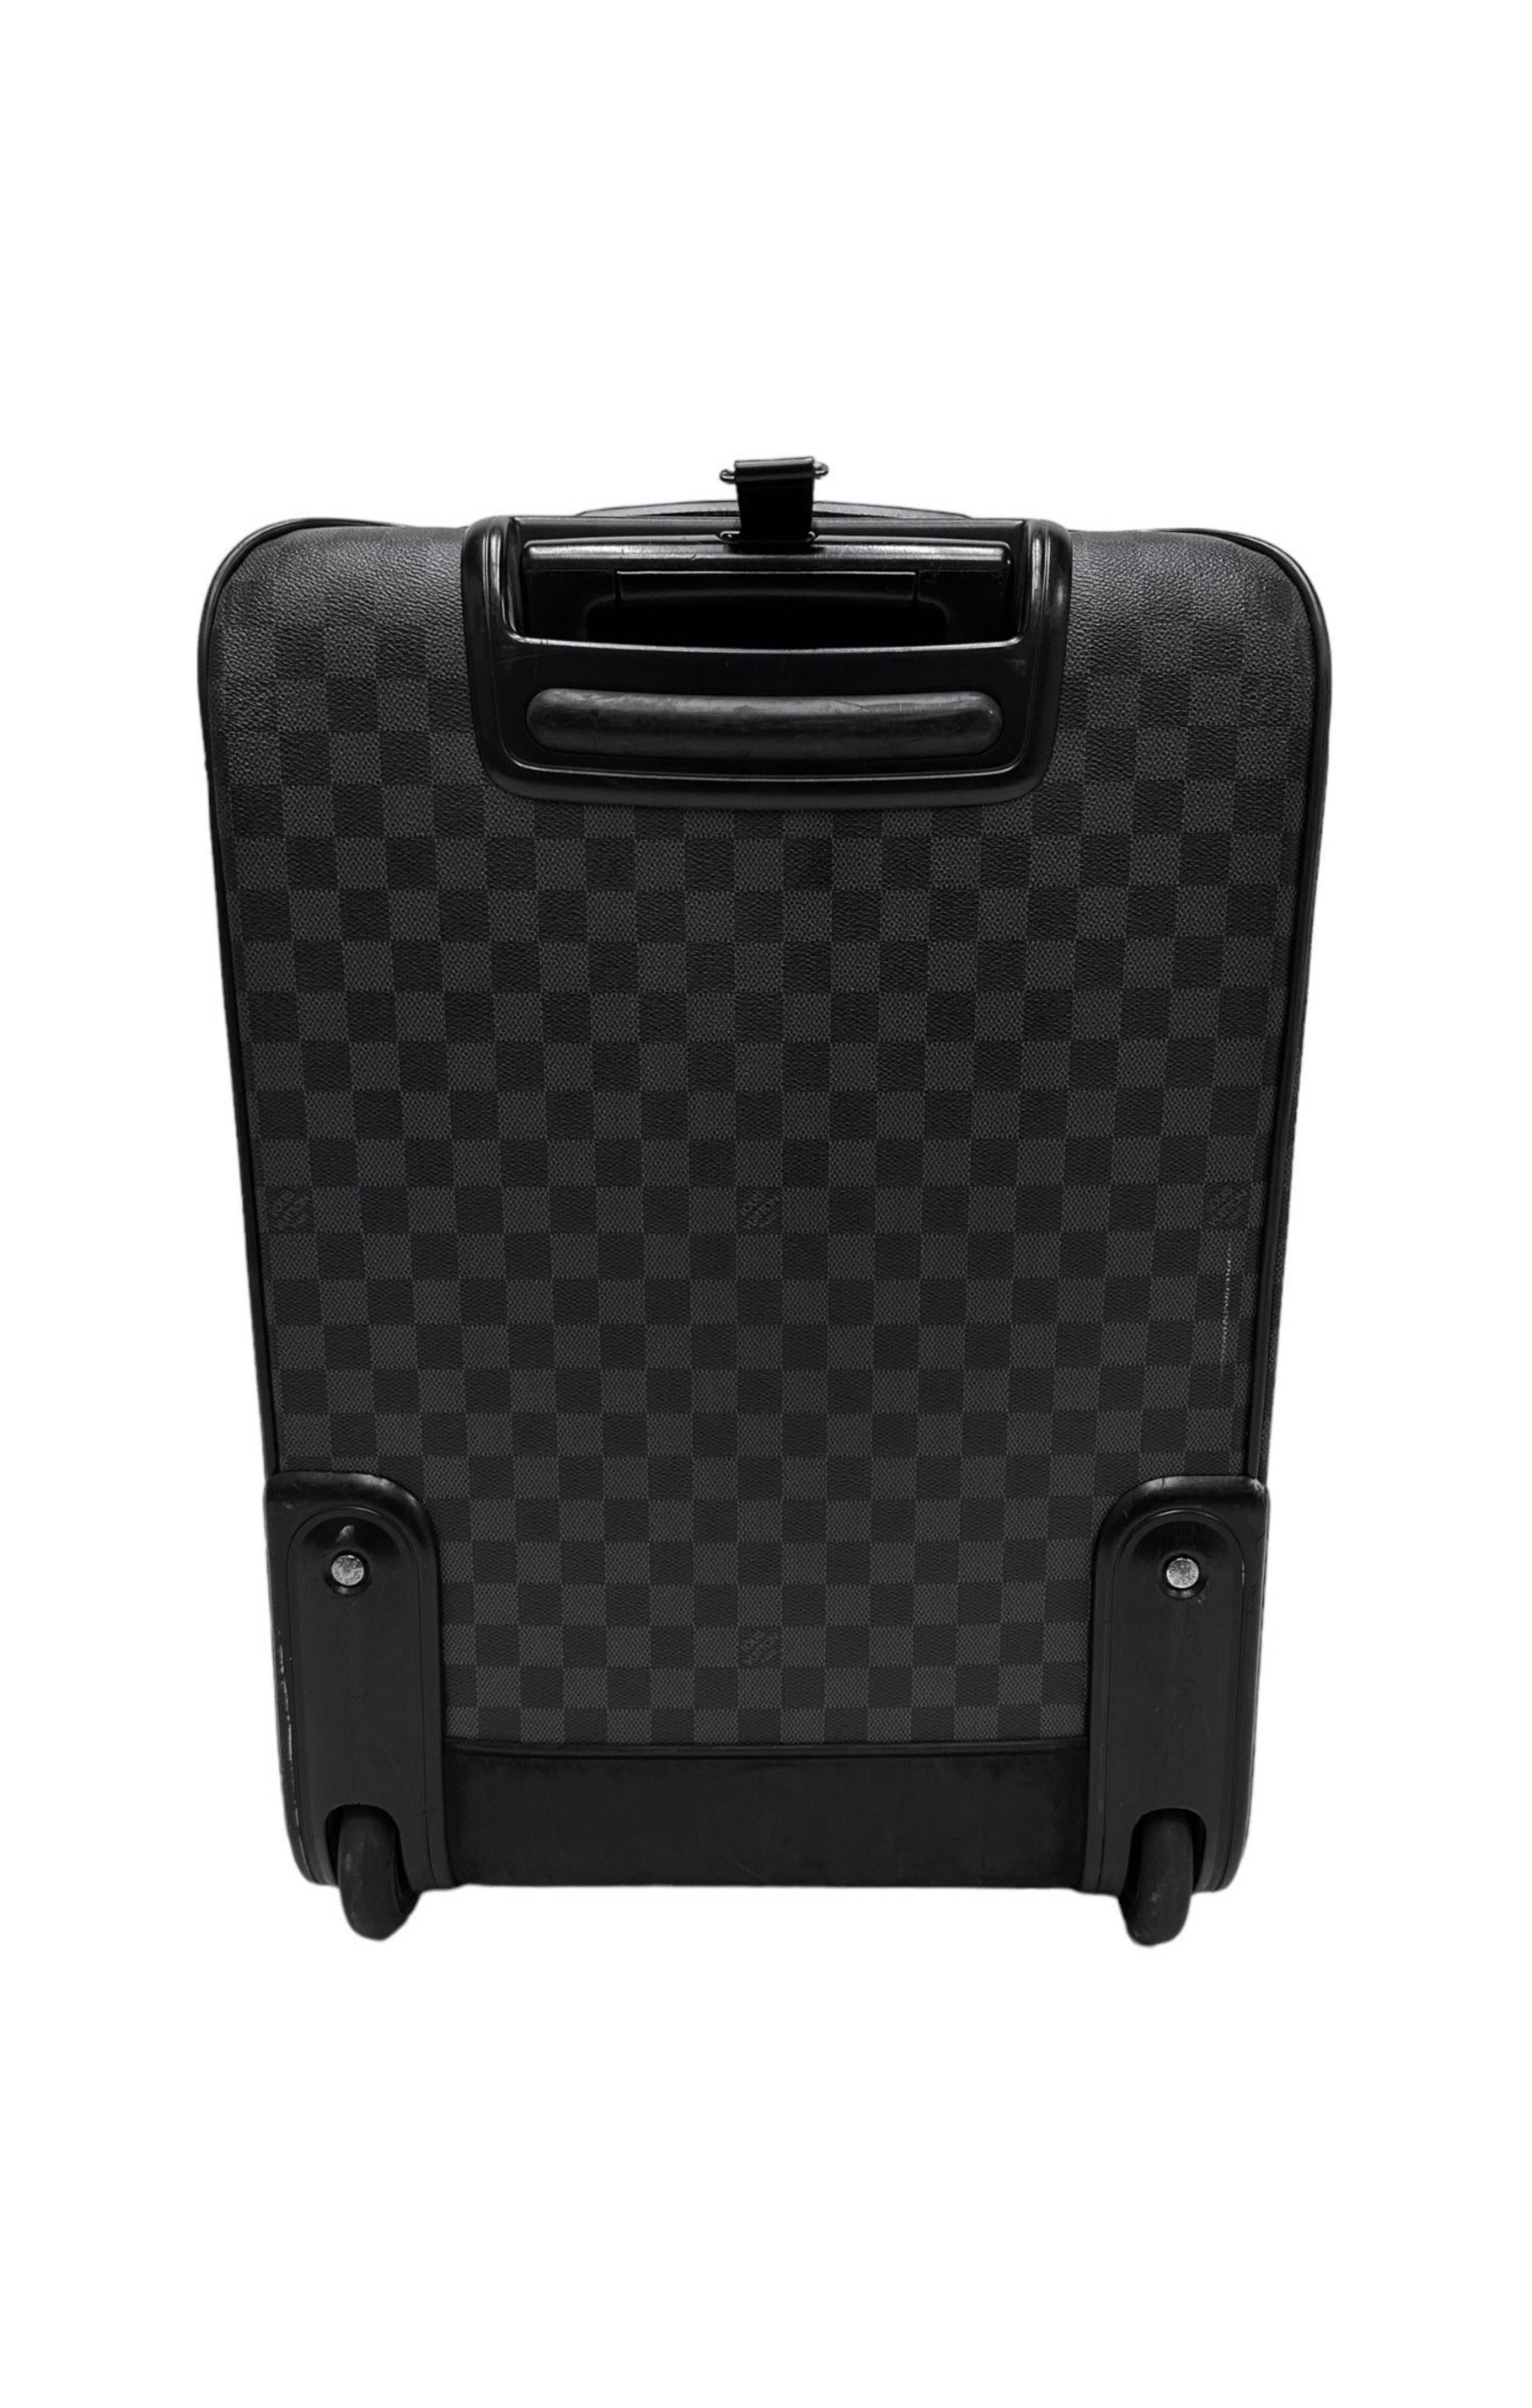 Louis Vuitton Carry-on Luggage